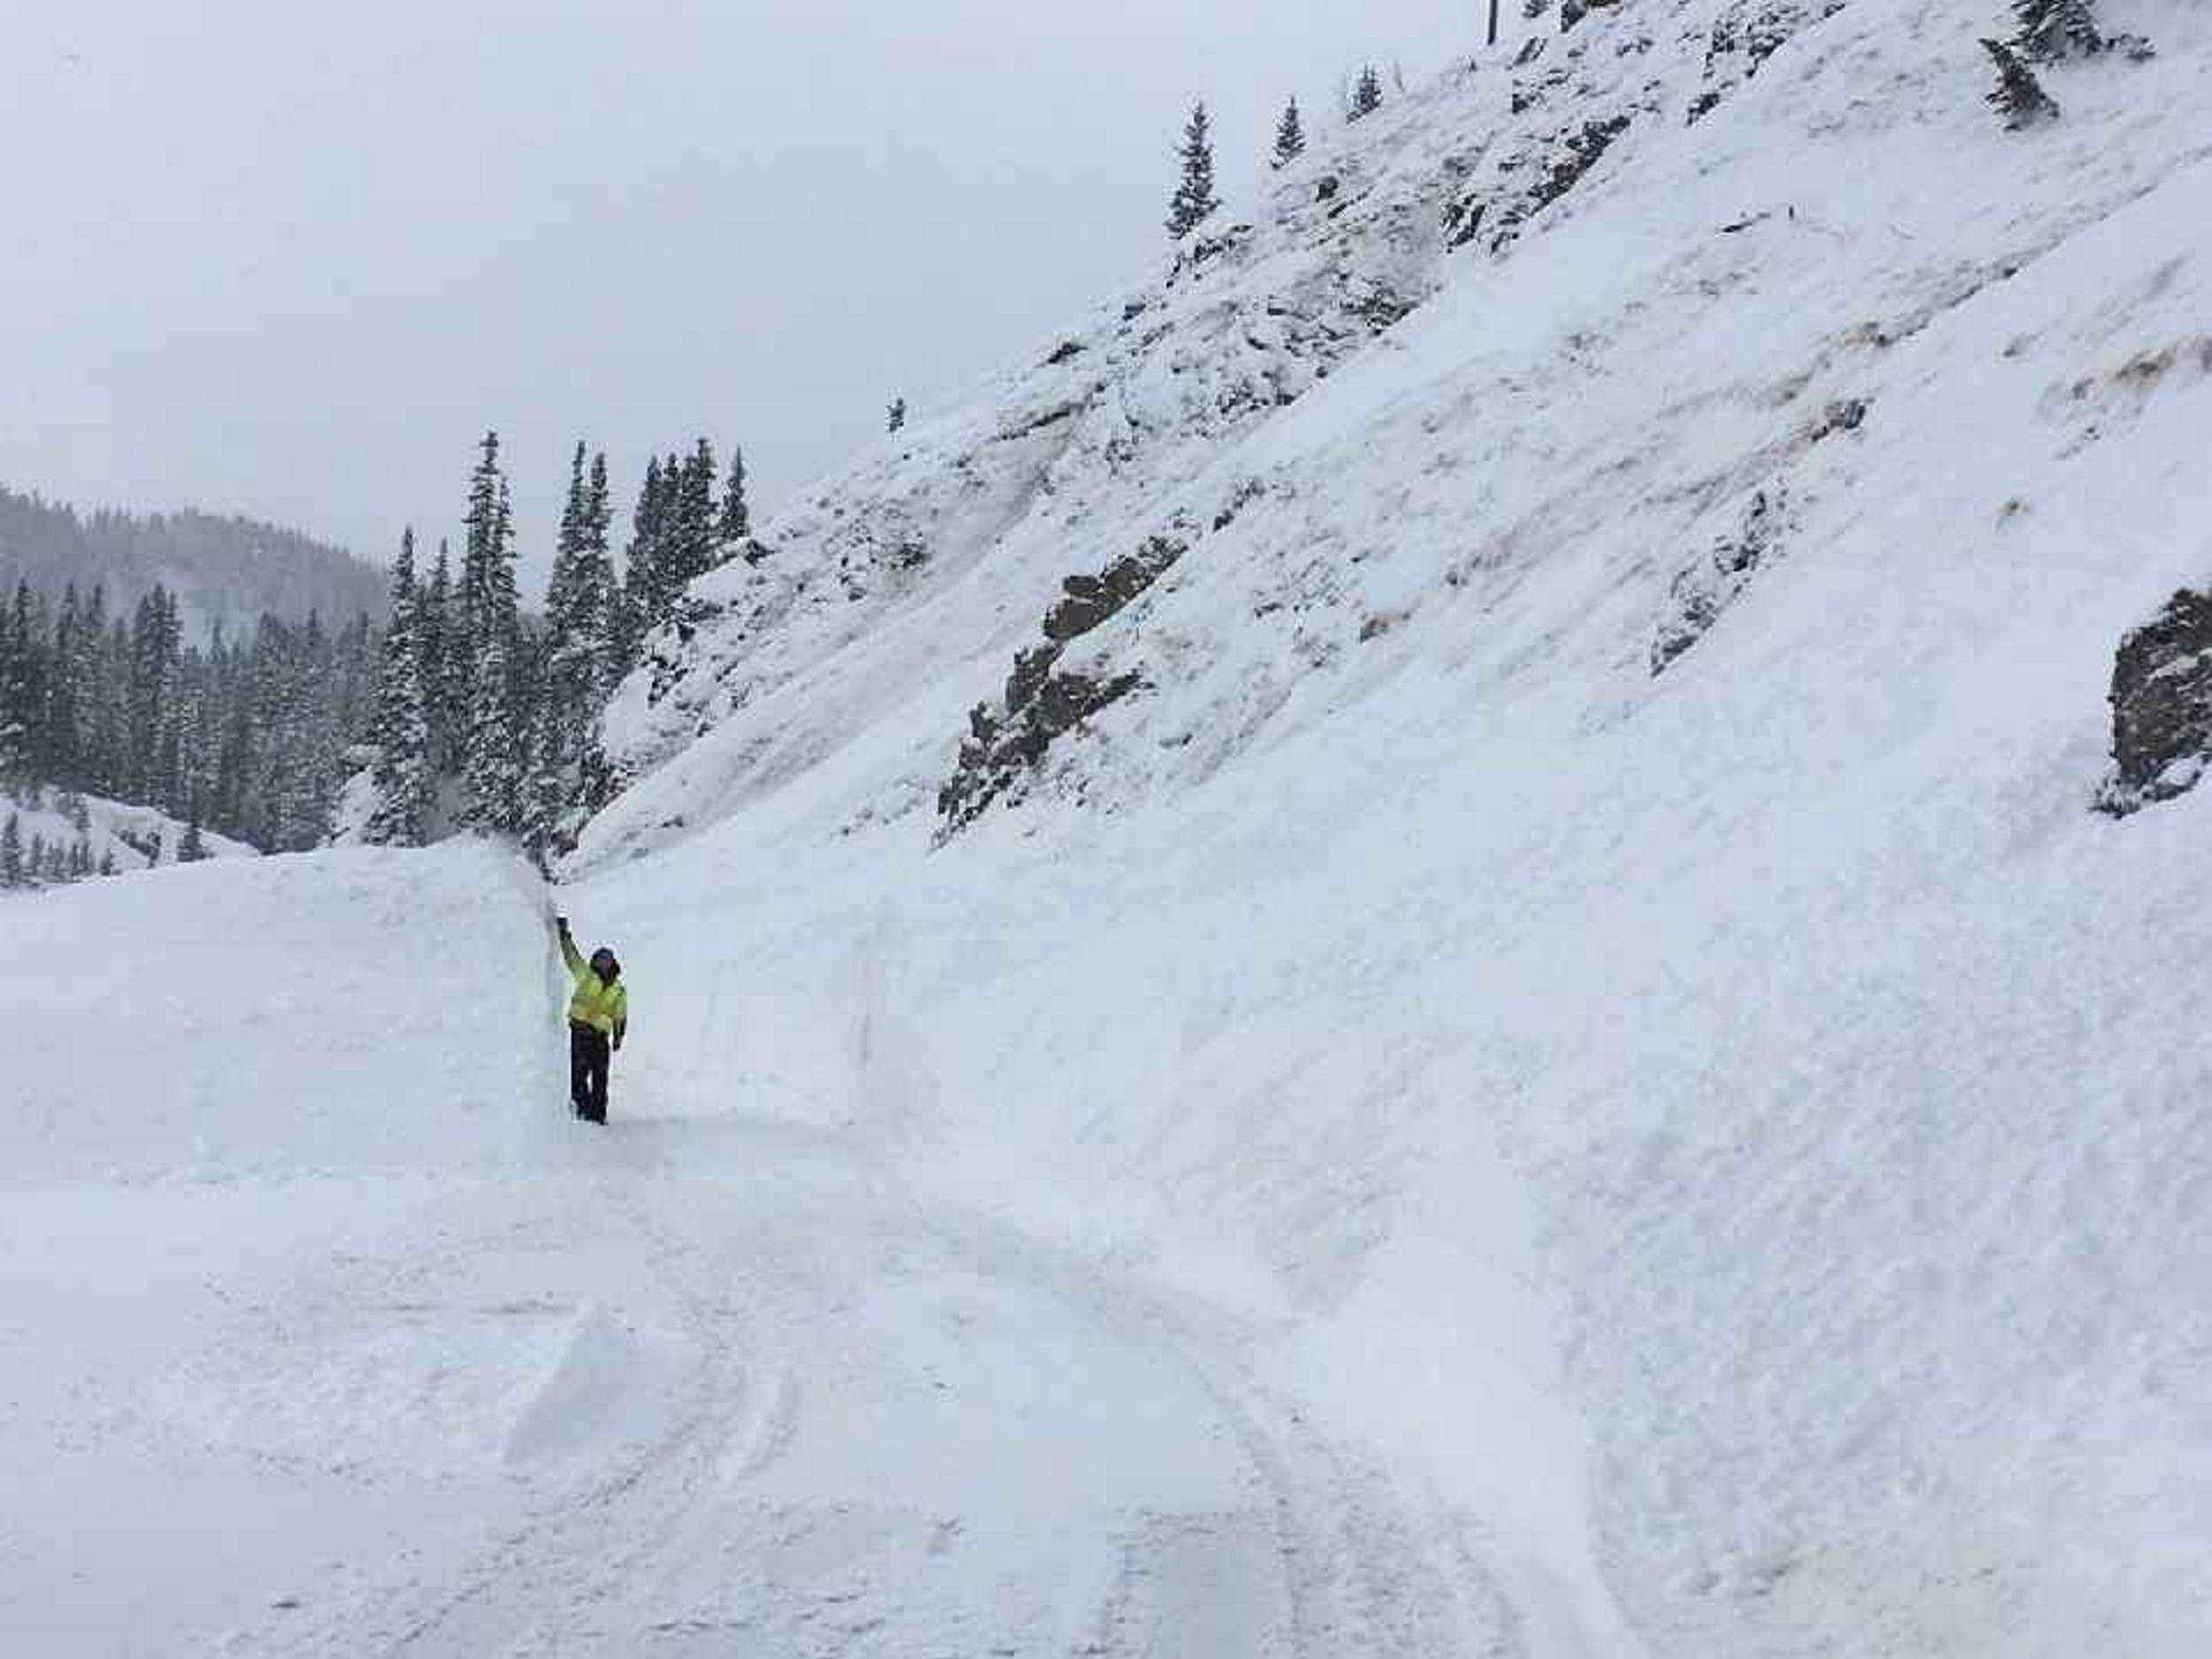 Avalanche passing photo